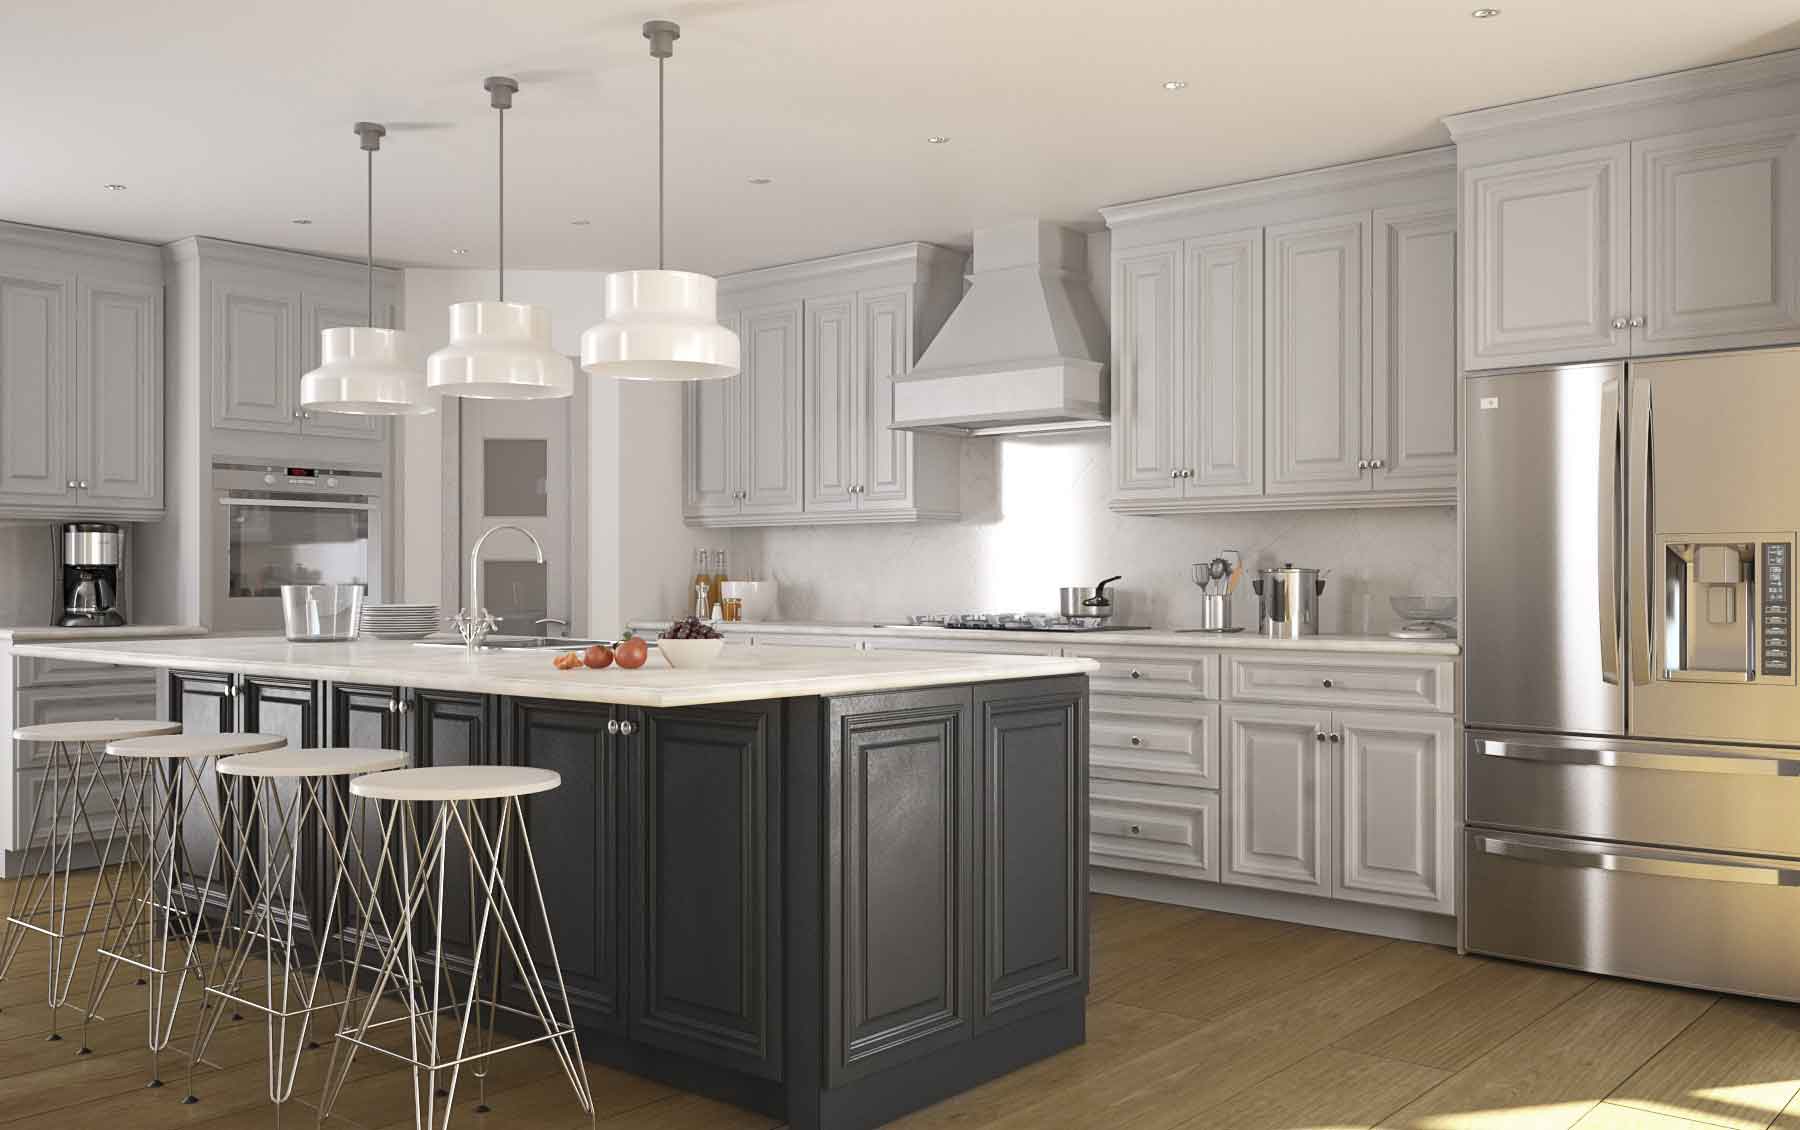 Get To Know The Light Grey Kitchen Cabinet Design That Becoming Popular | Roy Home Design